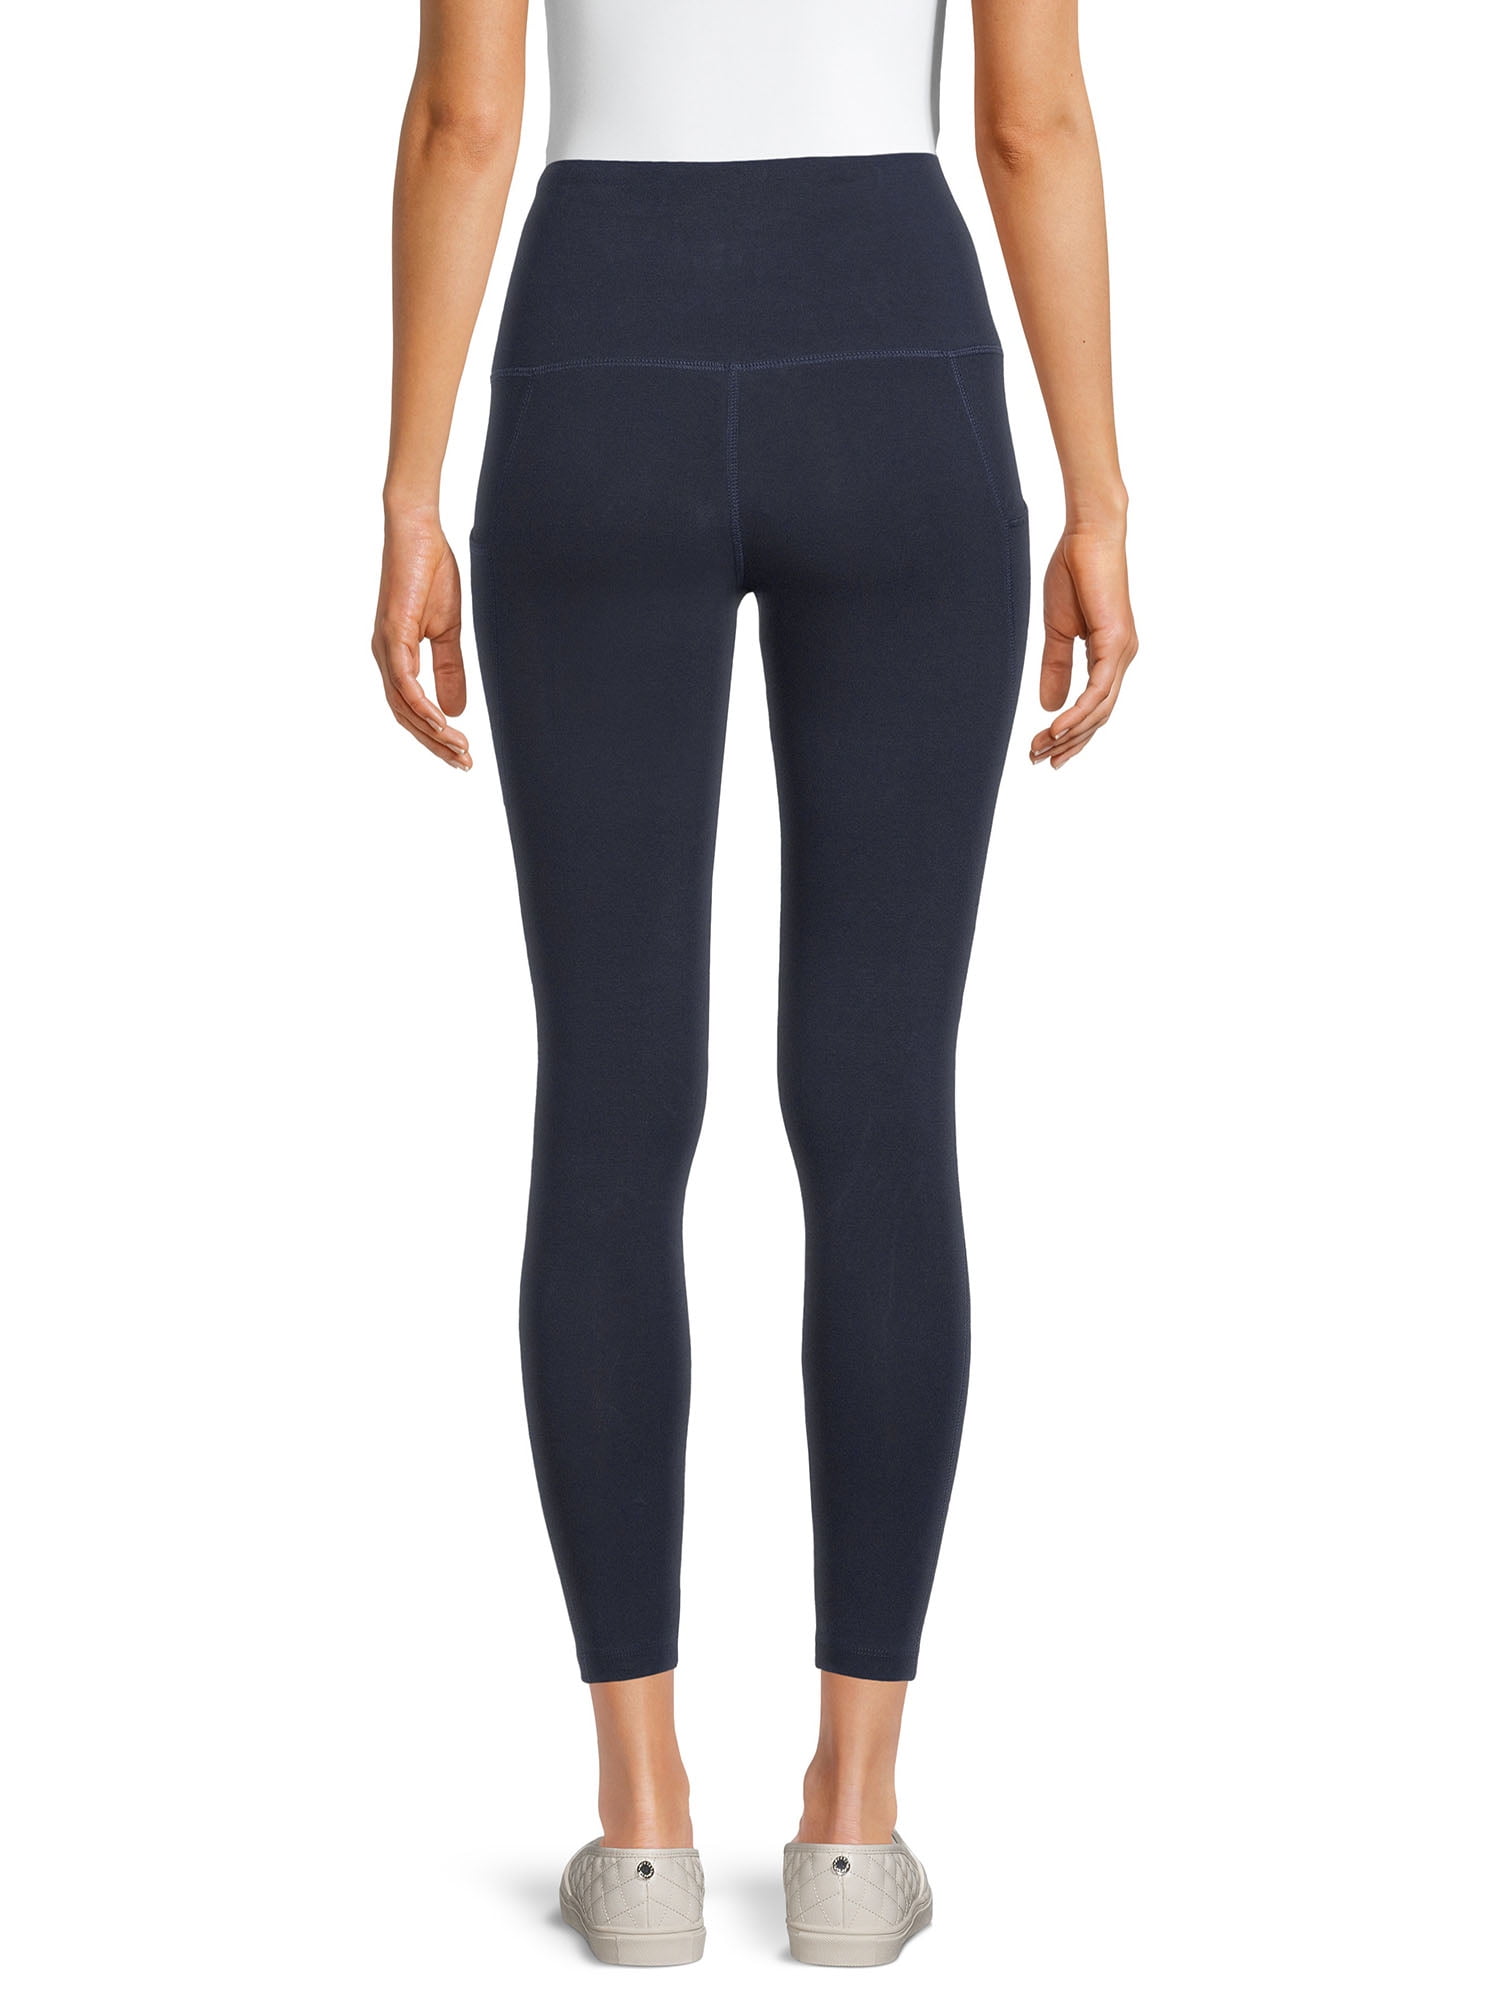 Thermals for Women: Buy Thermals Tops & Leggings for Women Online at Best  Price | Jockey India